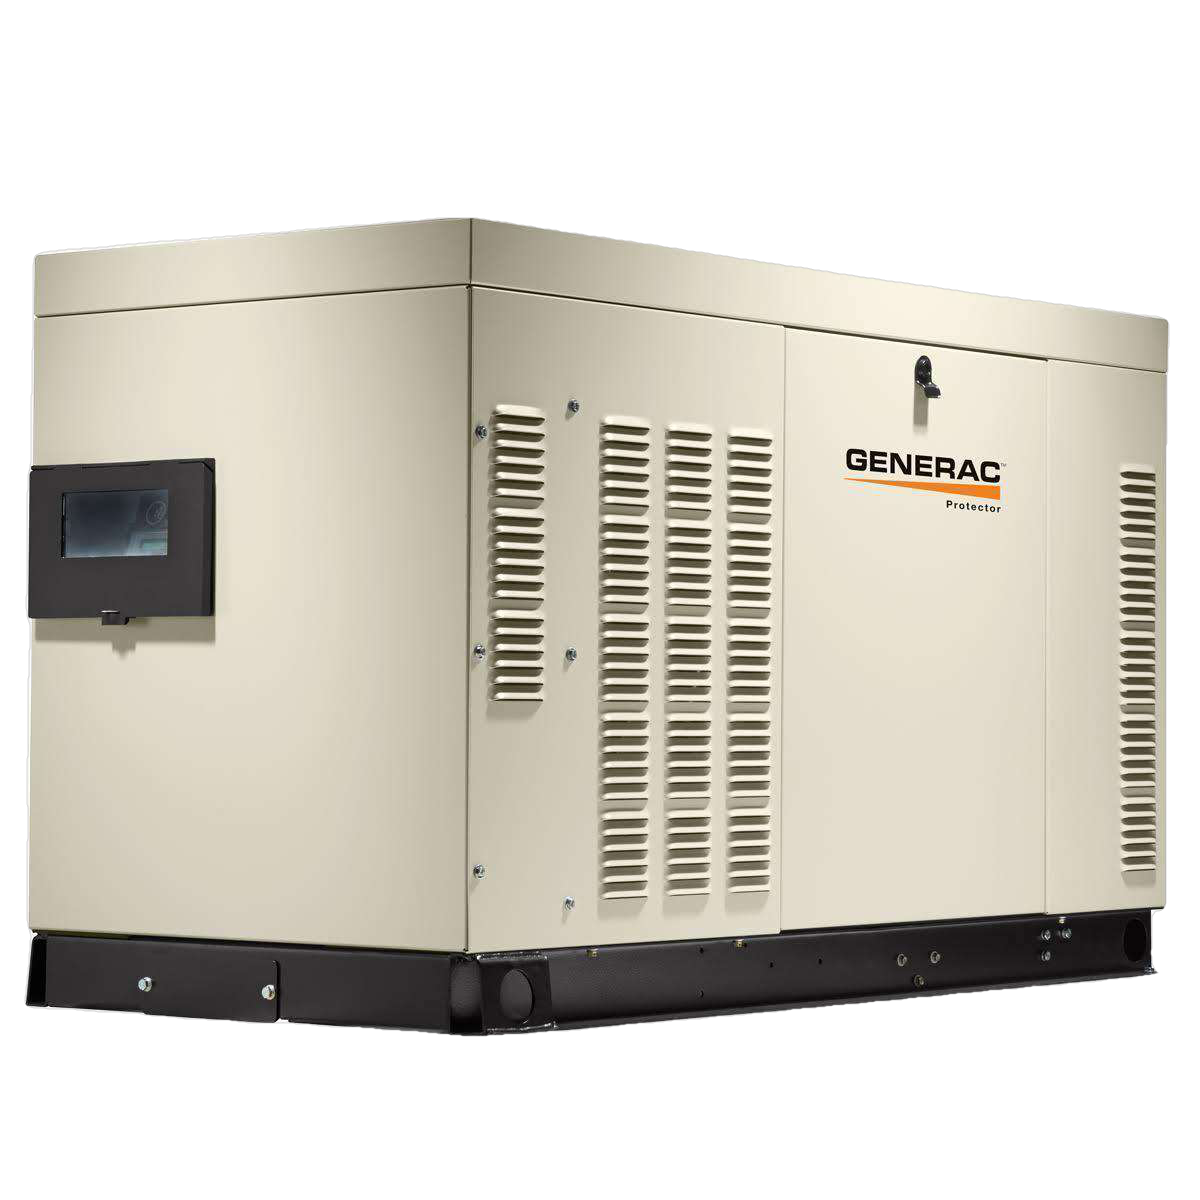 Generac, Generac Protector 25kW RG02515ANSX Liquid Cooled 1 Phase Standby Generator Manufacturer RFB